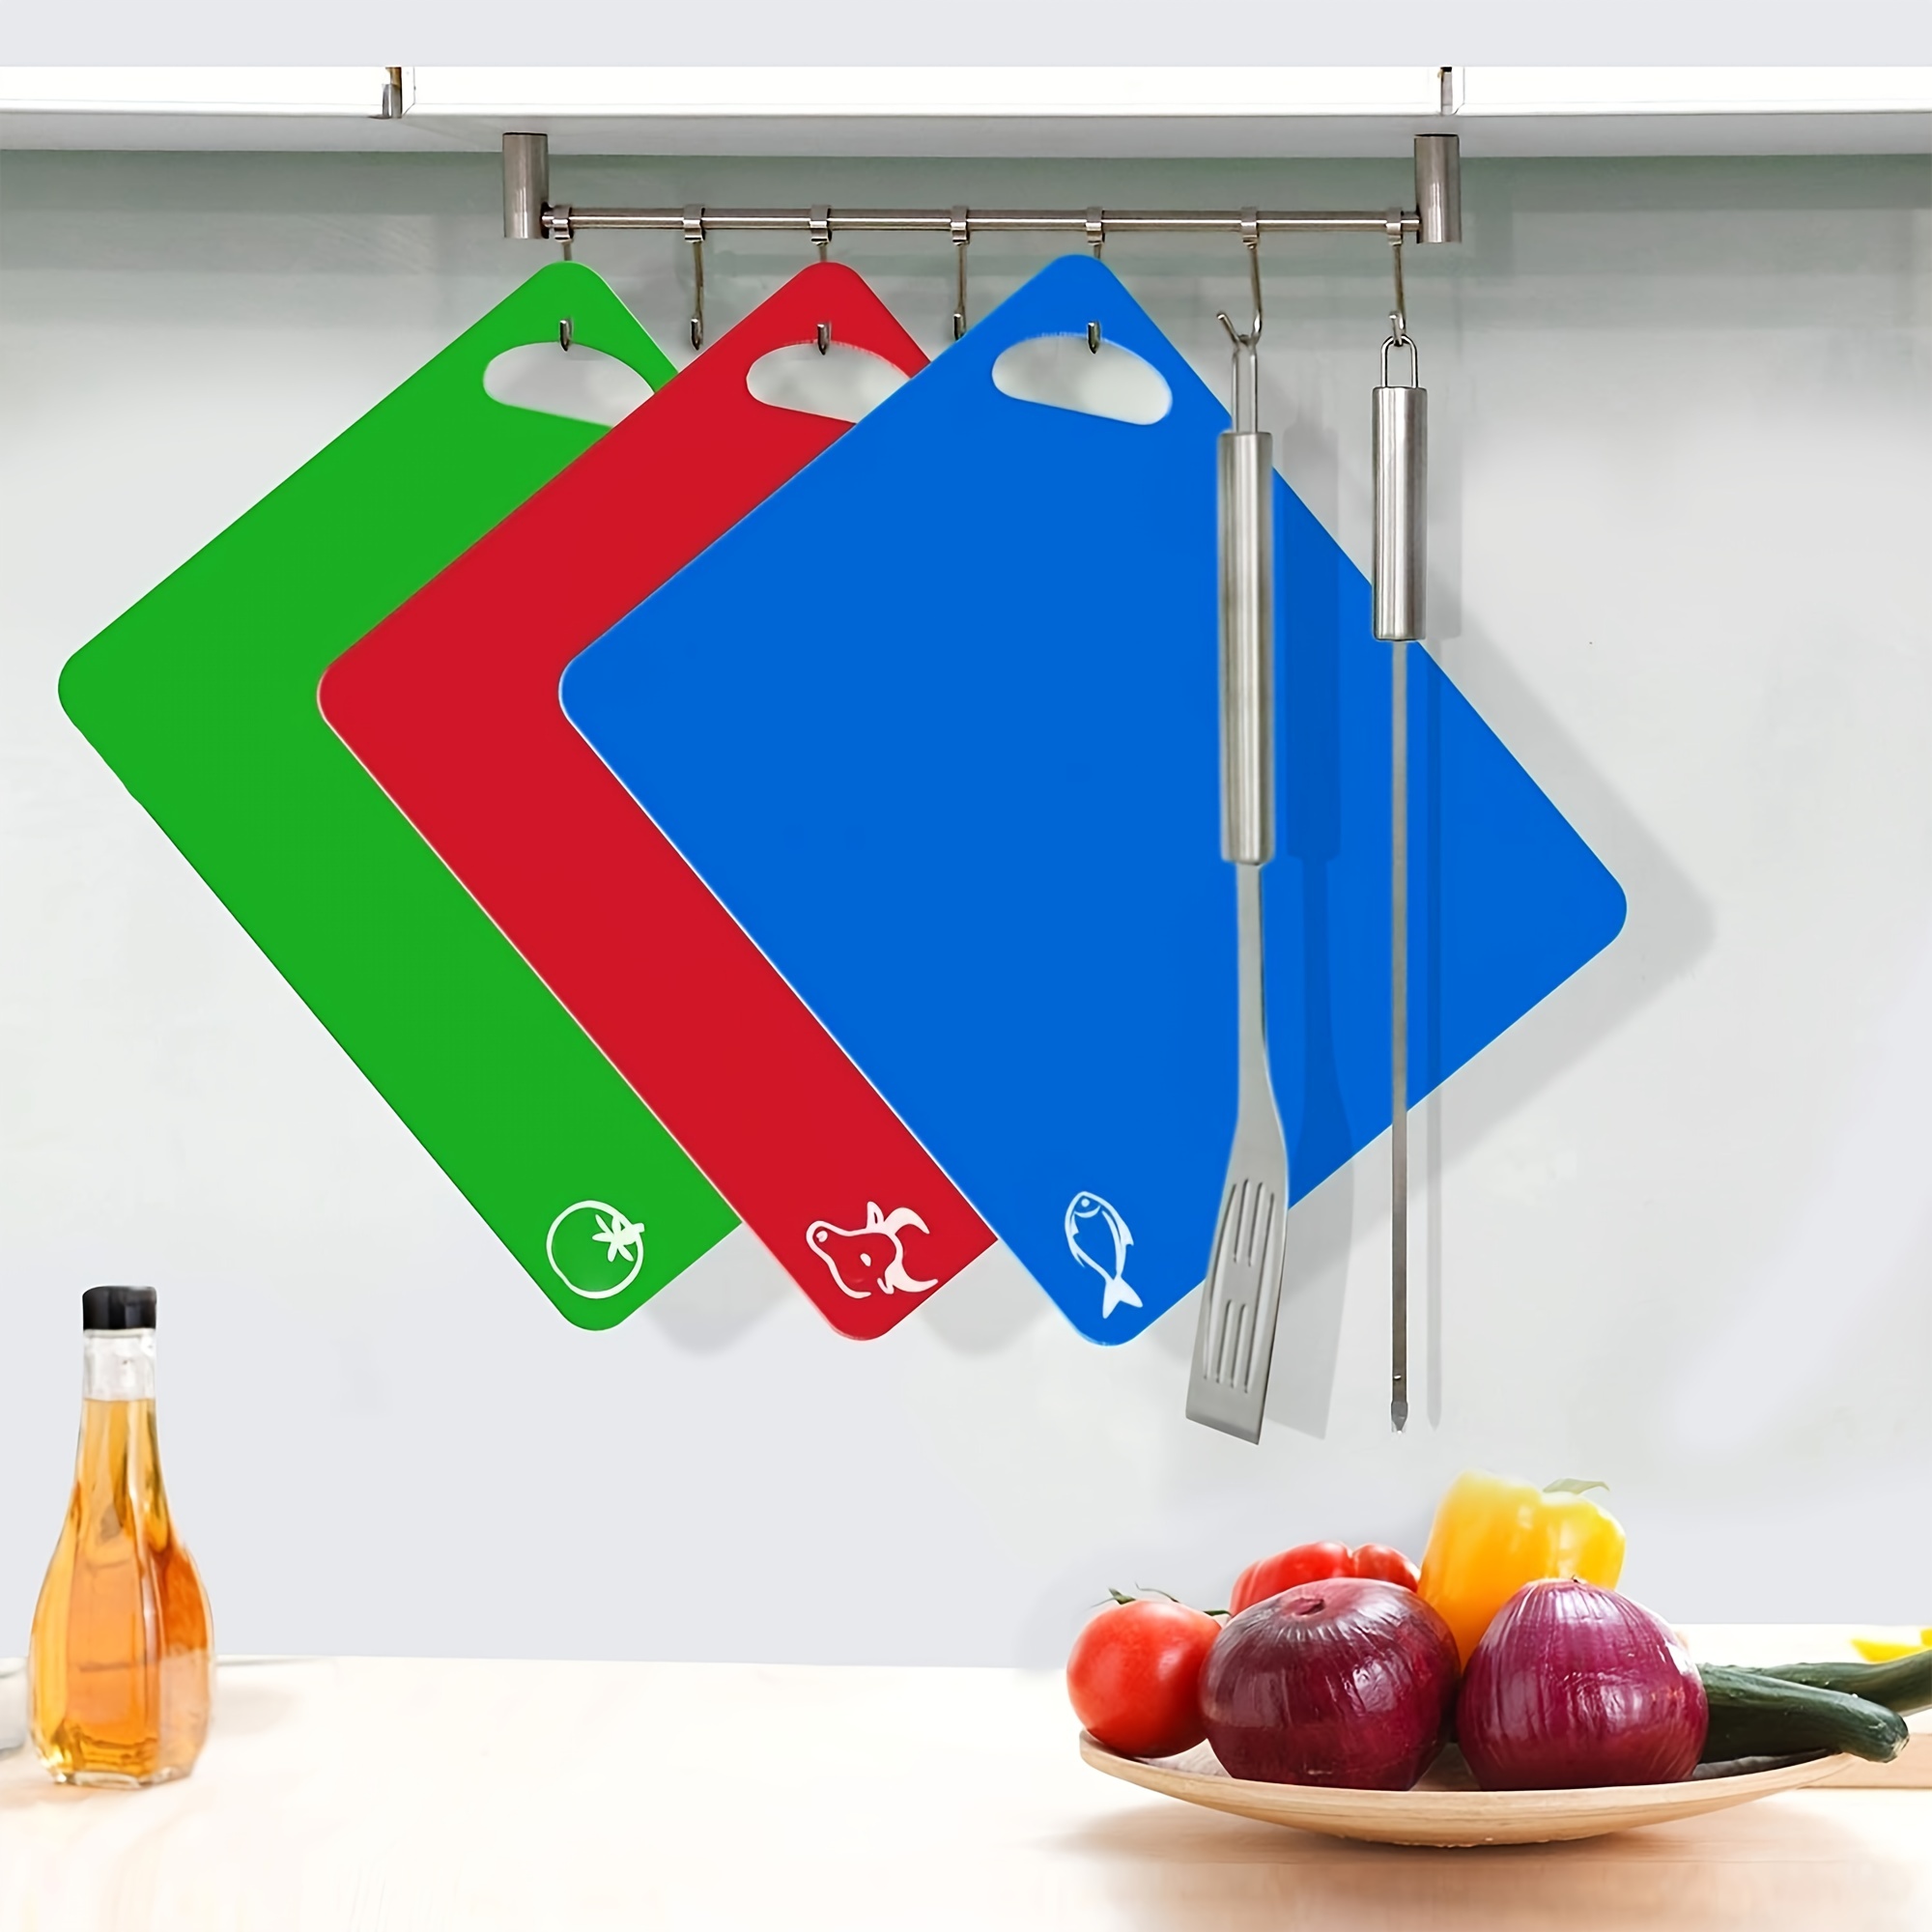 Flexible Cutting Board Mats, Plastic Cutting Board With Food Icons